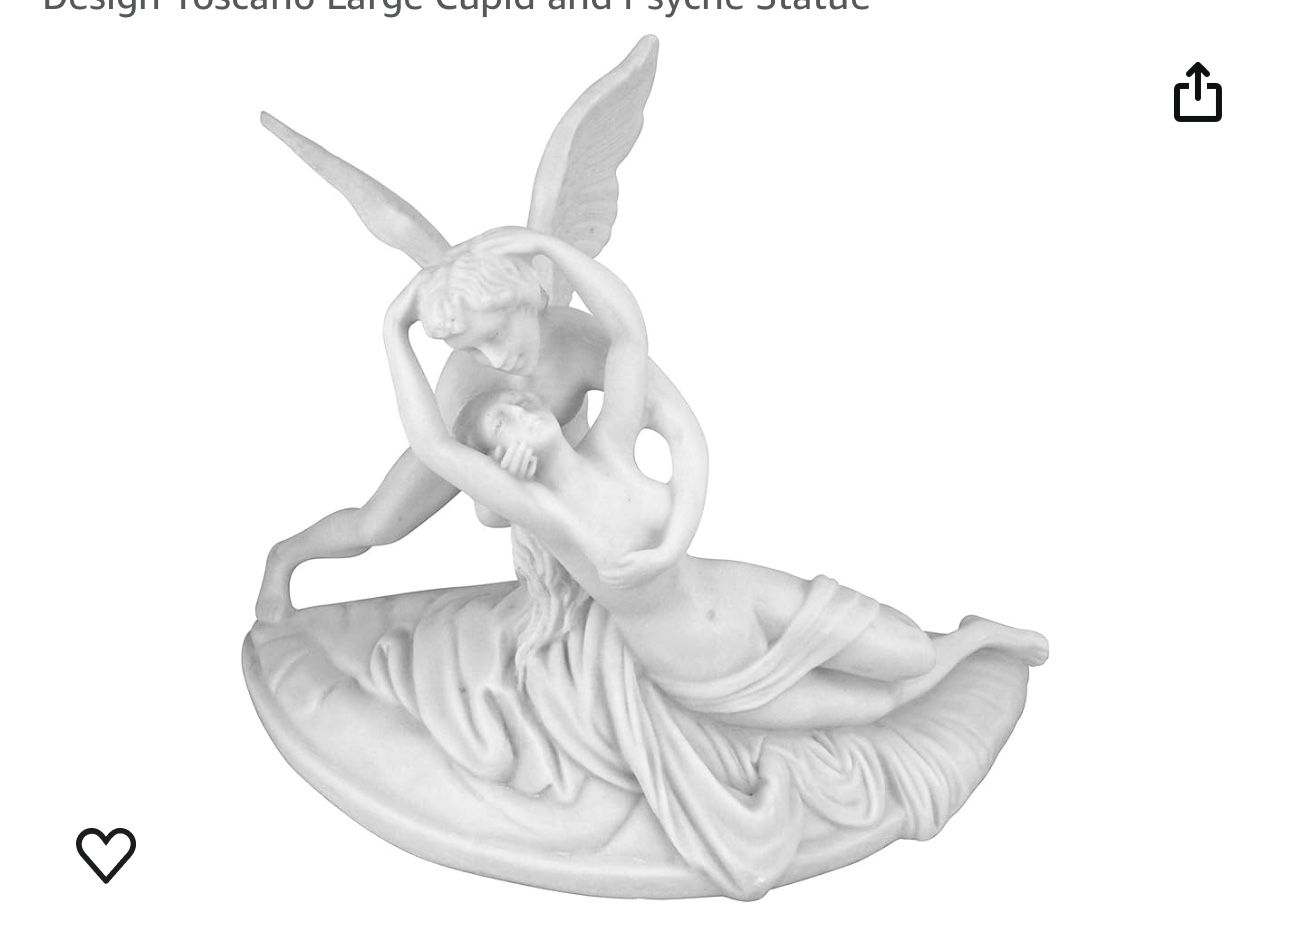 Design Toscano Large Cupid and Psyche Statue